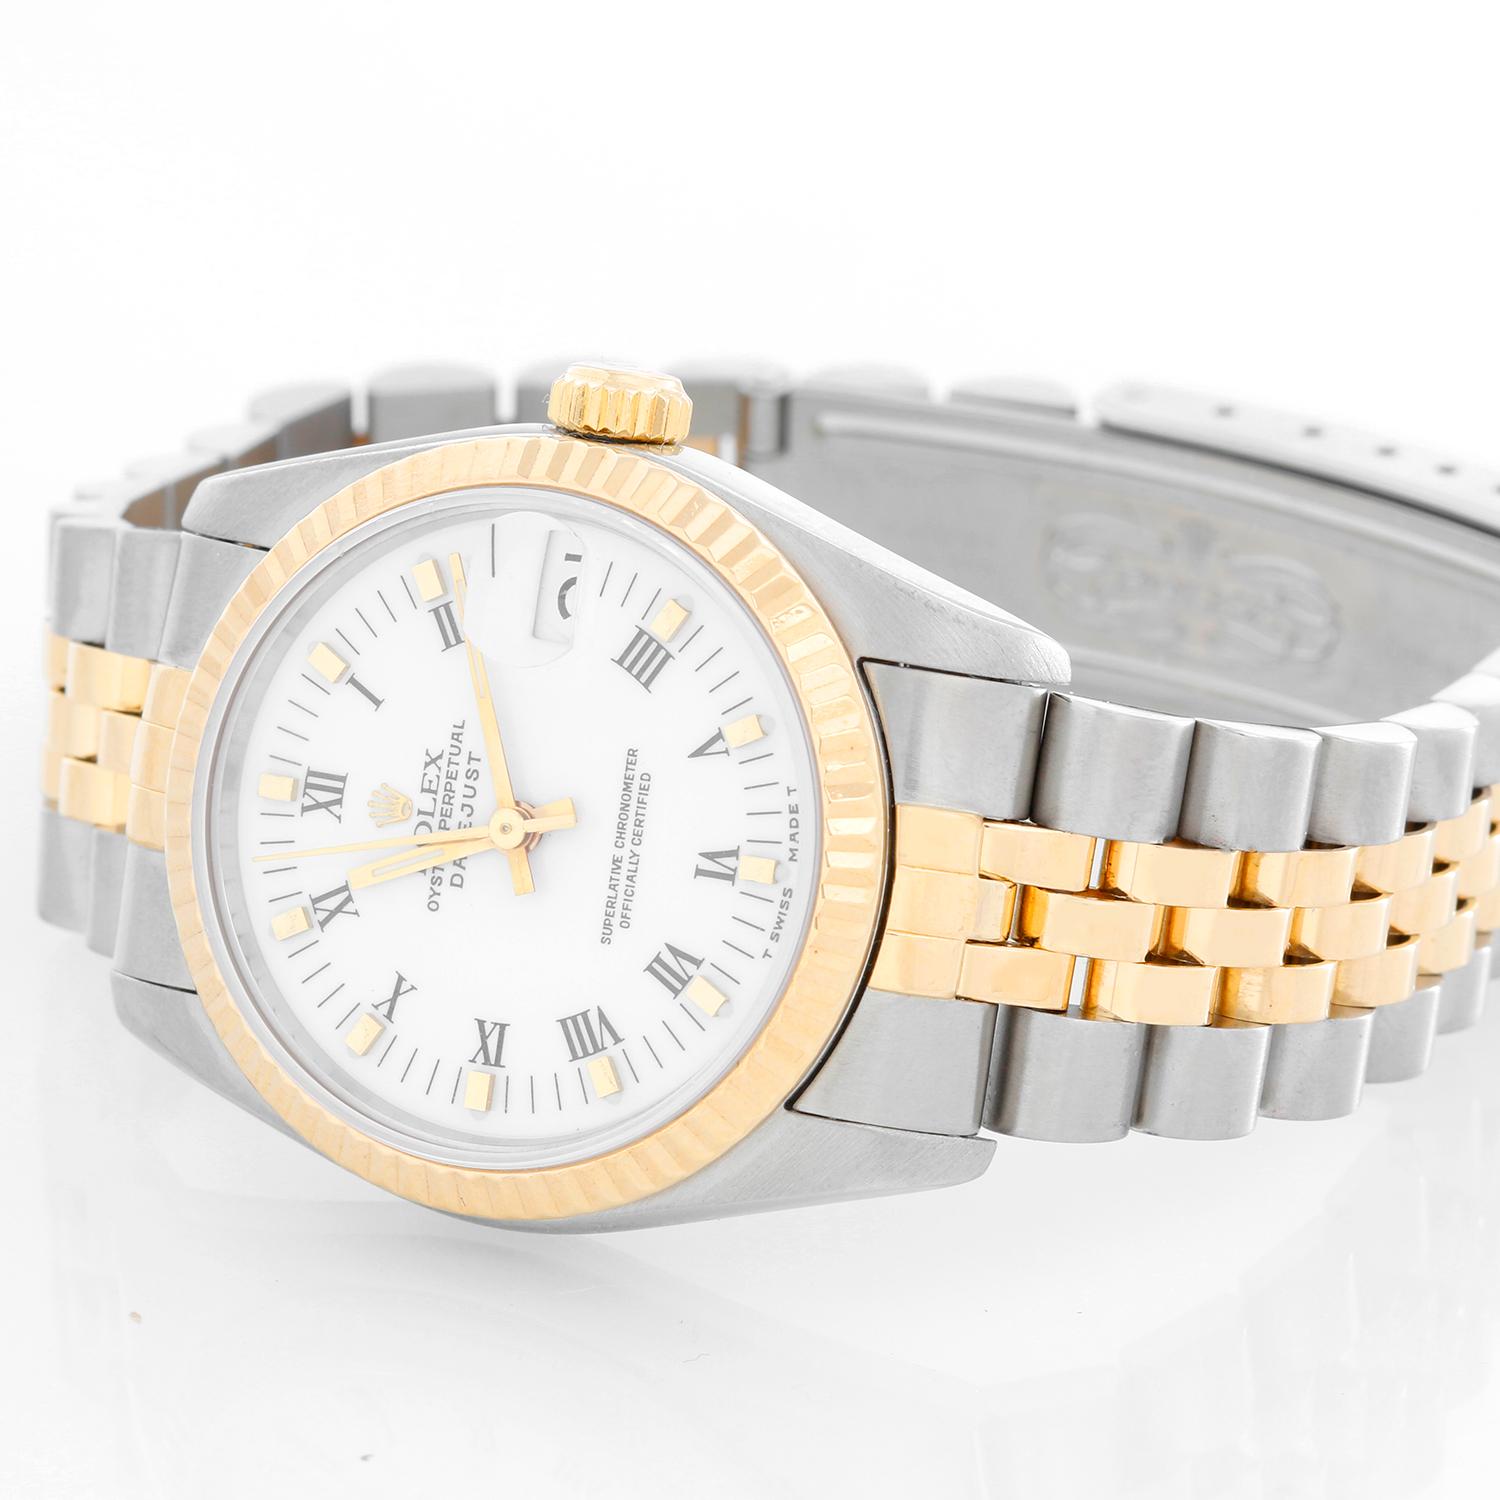 Rolex Datejust Midsize 2-Tone Watch 68273 - Automatic winding, 29 jewels, Quickset, sapphire crystal. Stainless steel case with 18k yellow gold  fluted bezel. White dial with black Roman numerals and gold hour markers. Stainless steel and 18k yellow